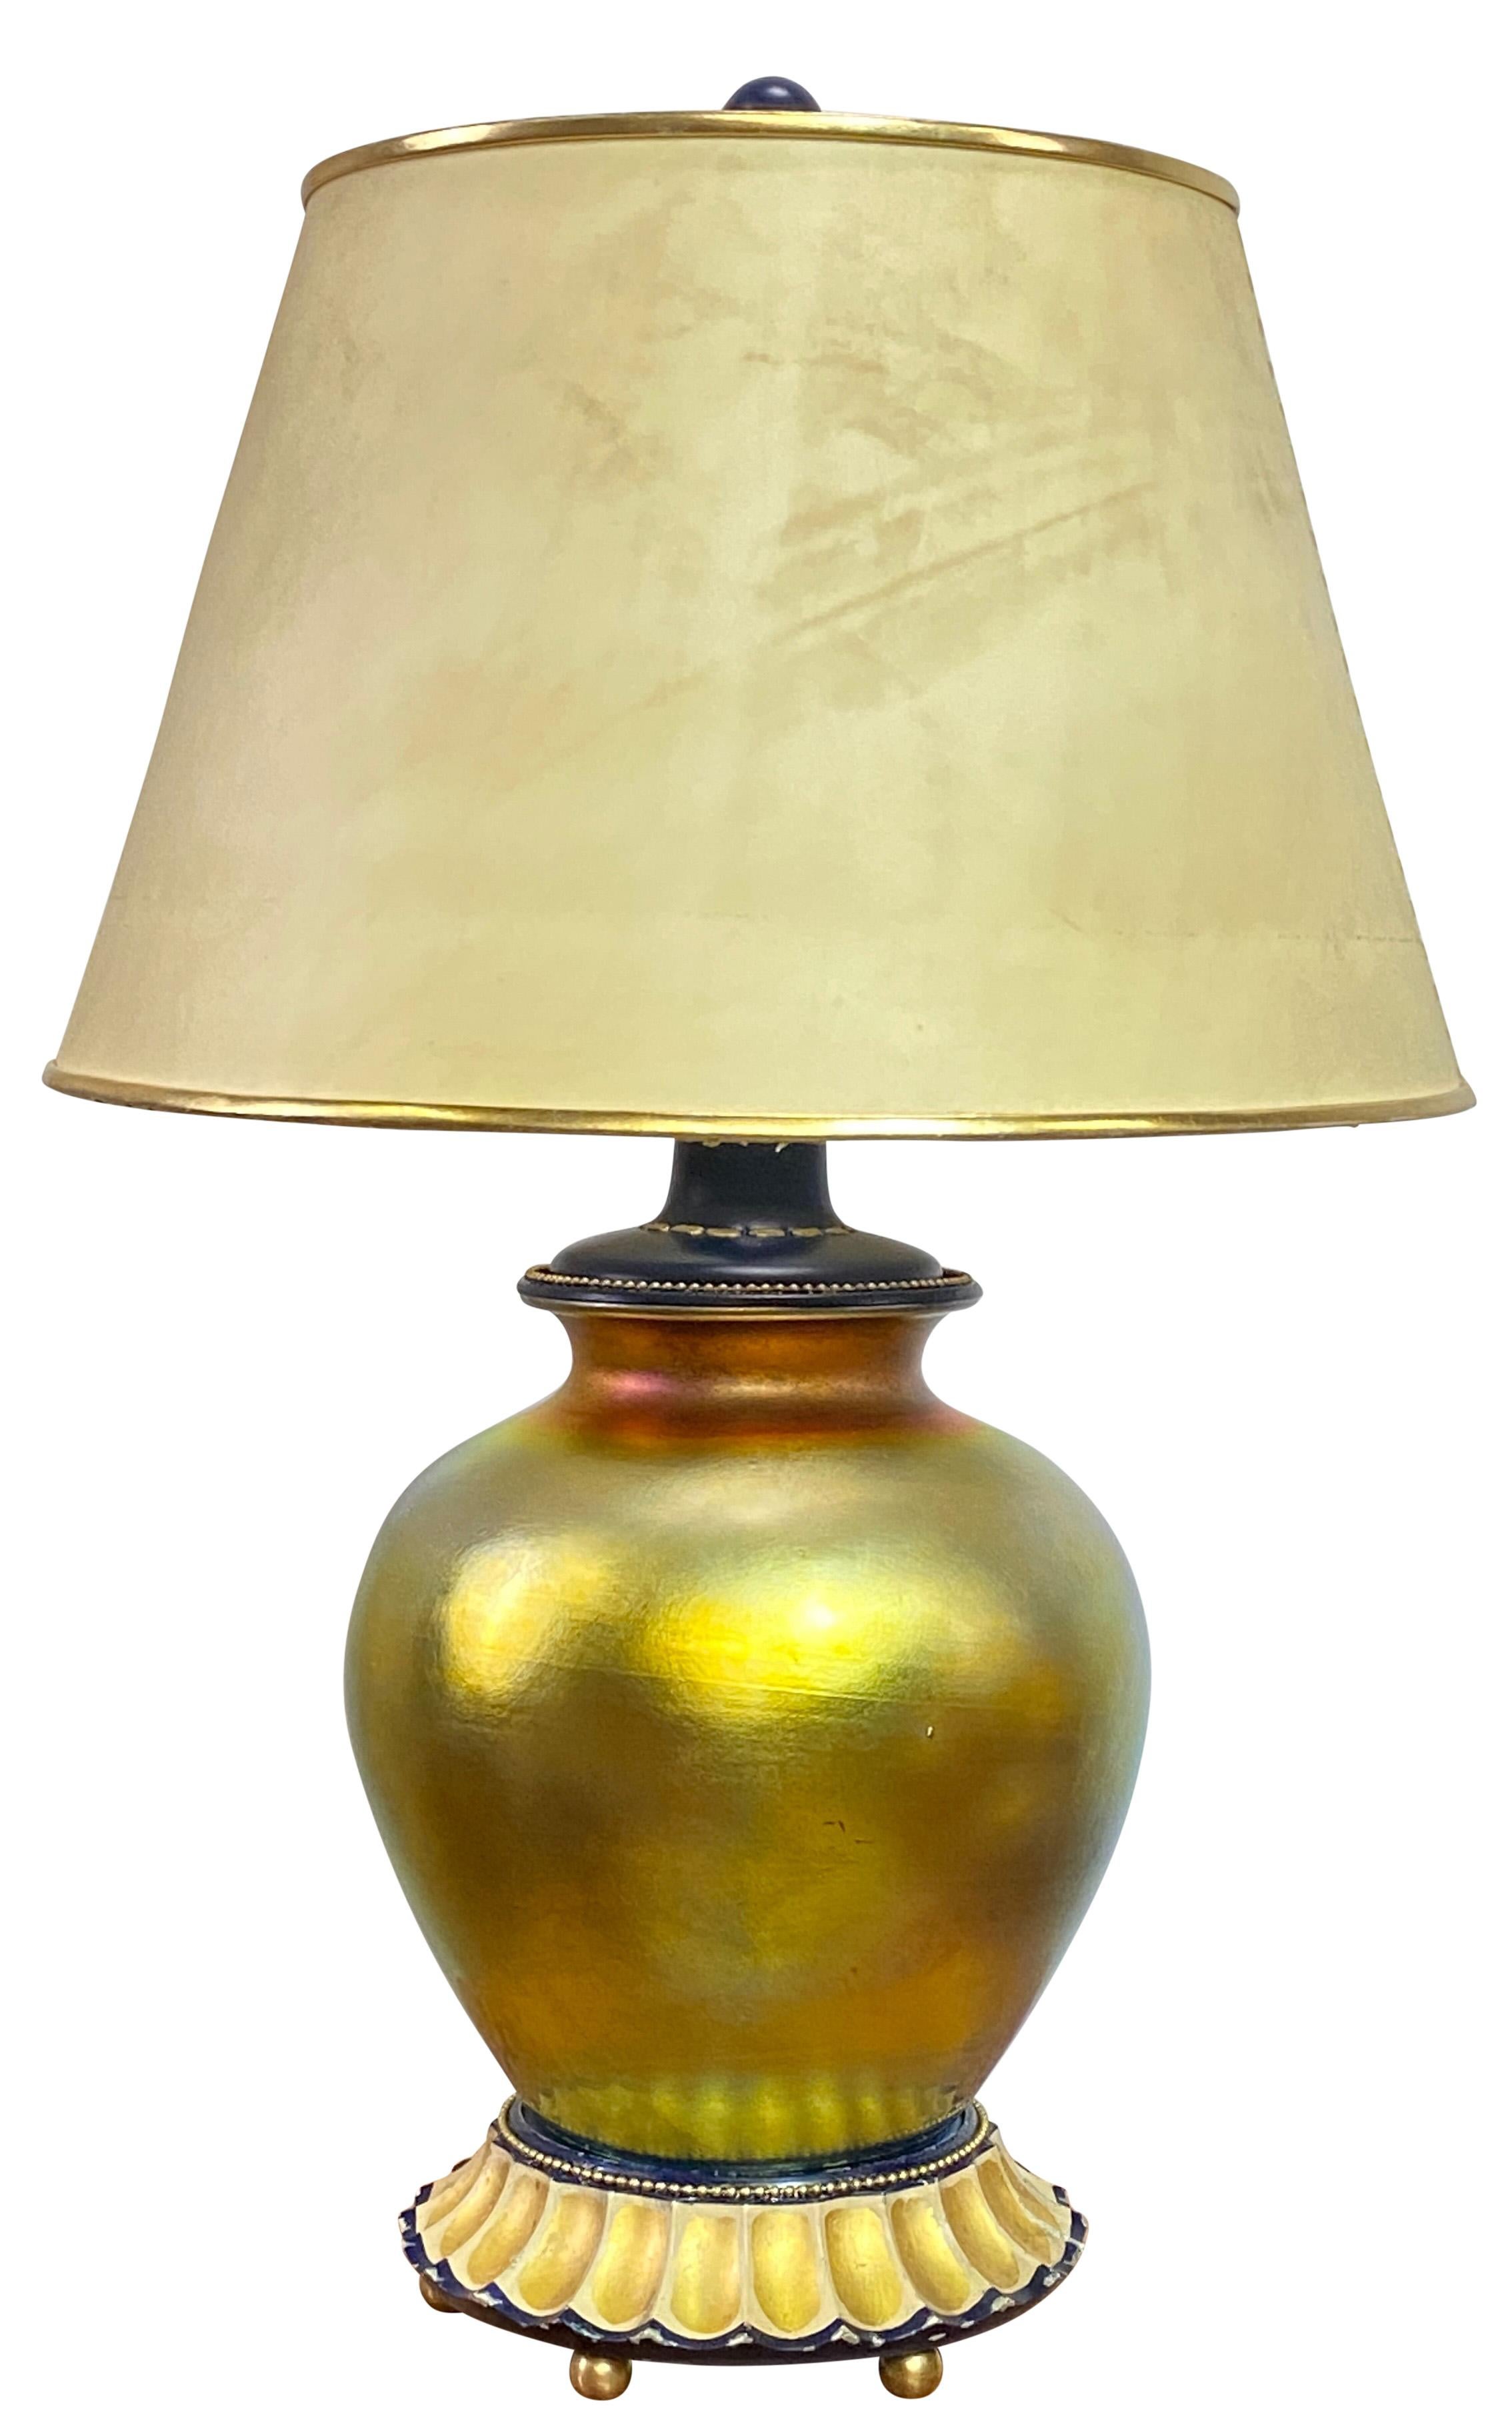 Antique Steuben Gold Aurene Art Glass Table Lamp, Early 20th Century For Sale 2